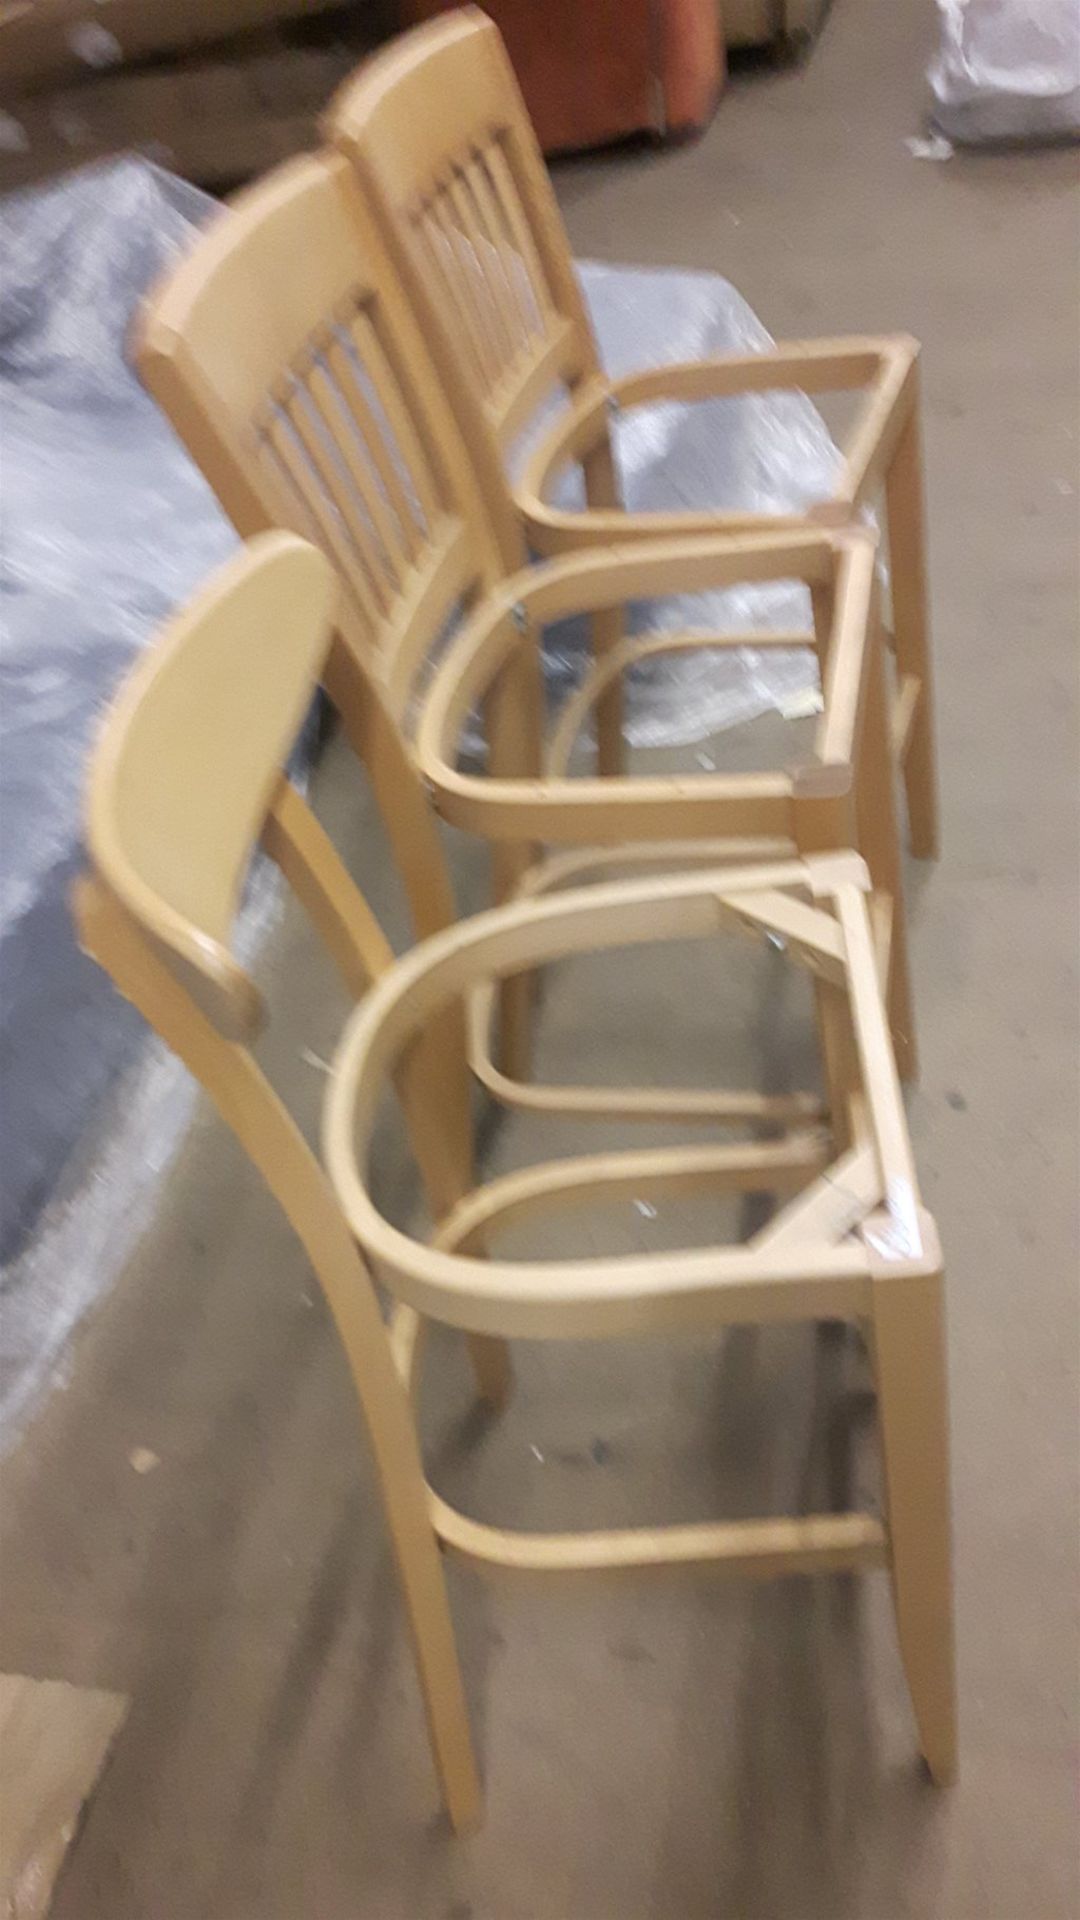 3 New old stock bar stools without seat pads. - Image 2 of 2